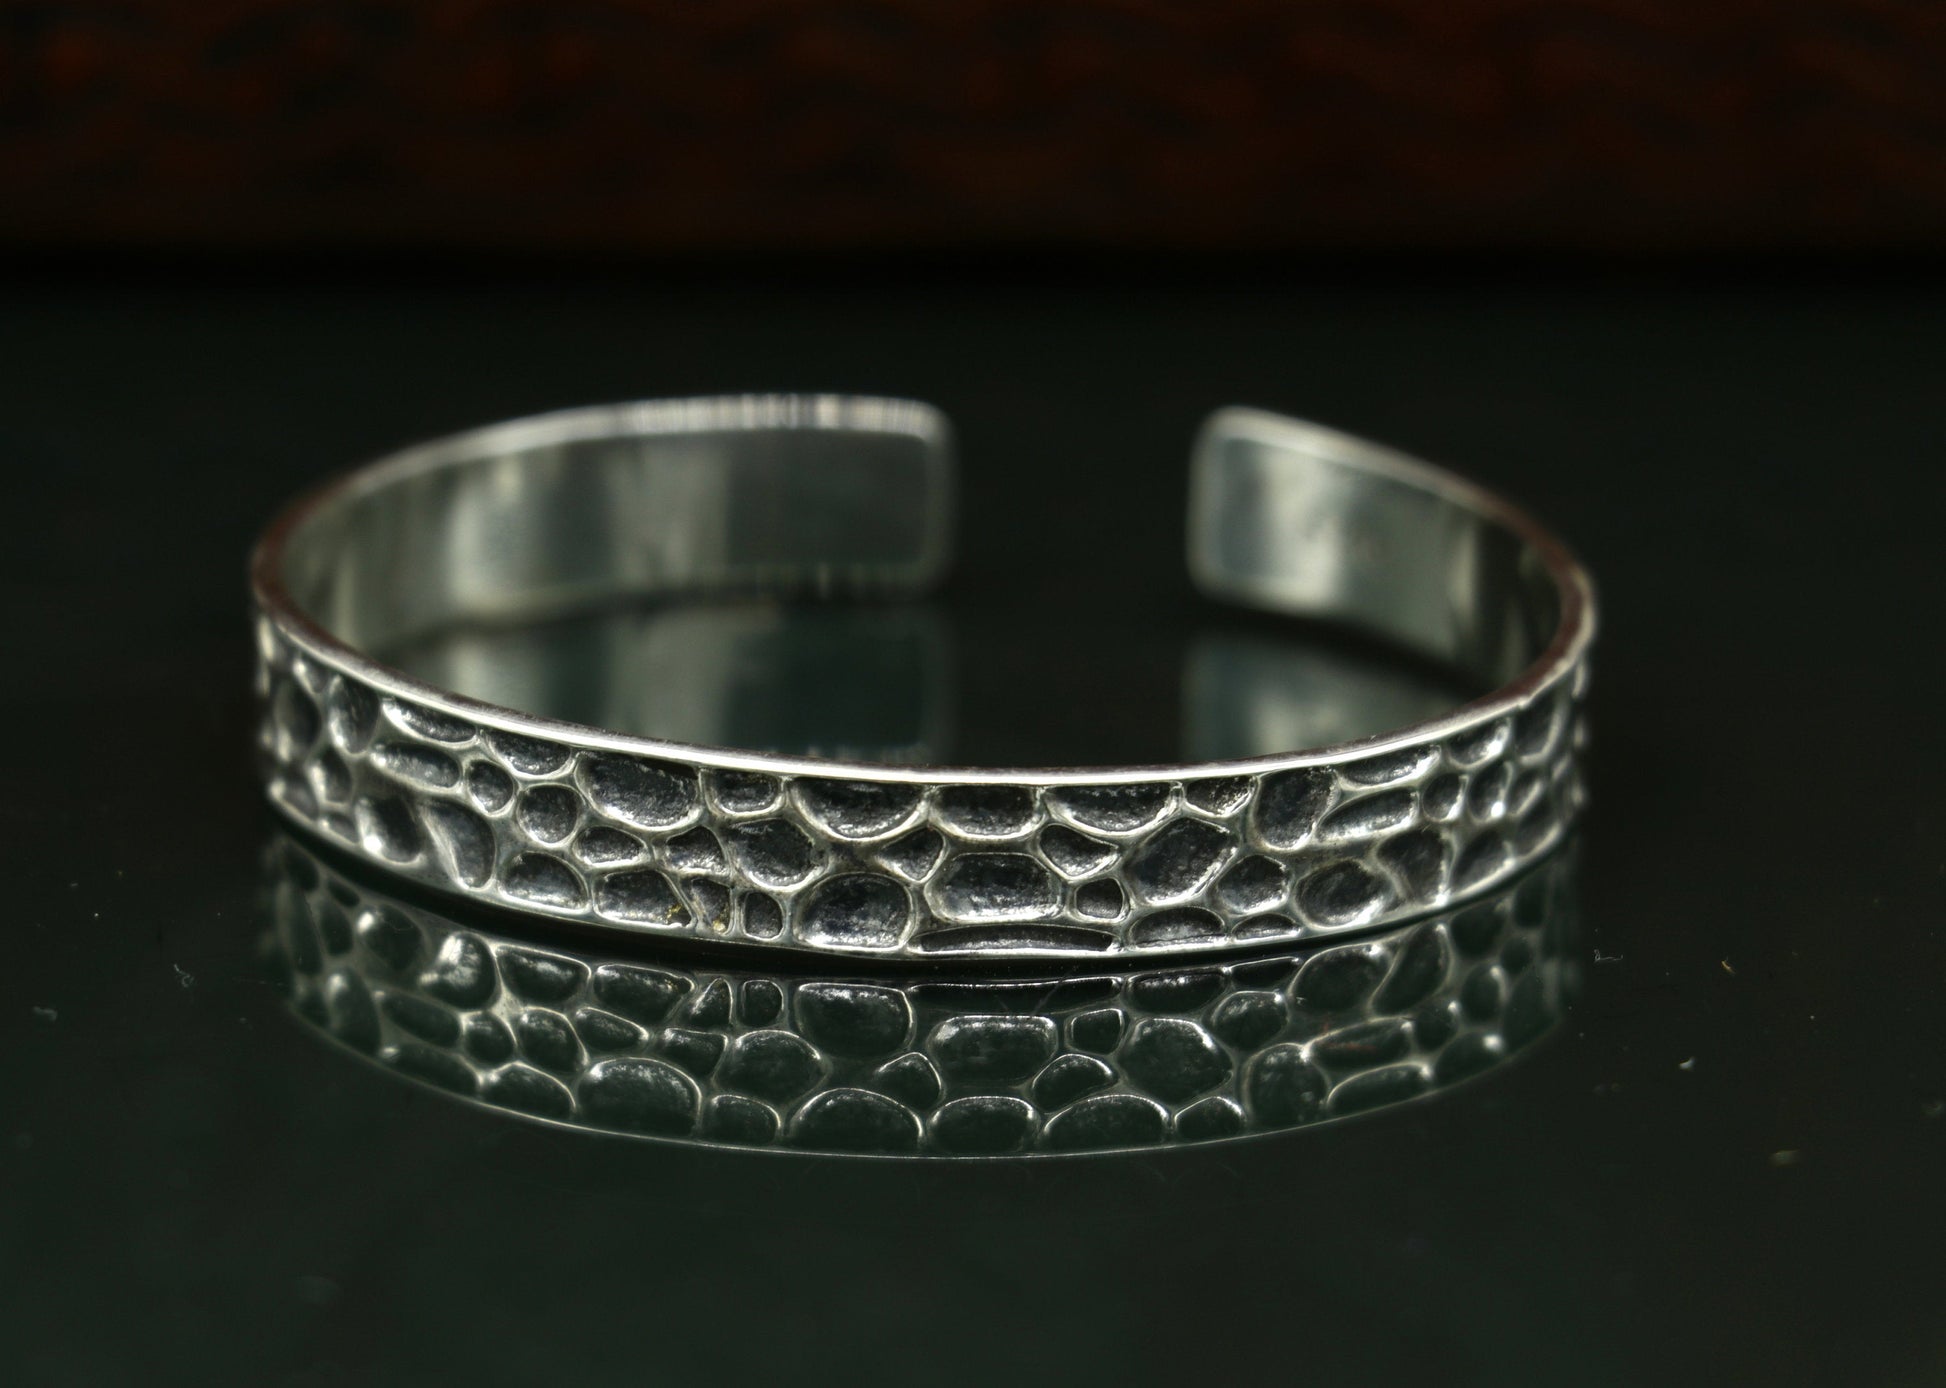 Authentic 925 sterling silver exclusive design handmade cuff kada bracelet, easy to adjust with your wrist, unisex jewelry cuff43 - TRIBAL ORNAMENTS